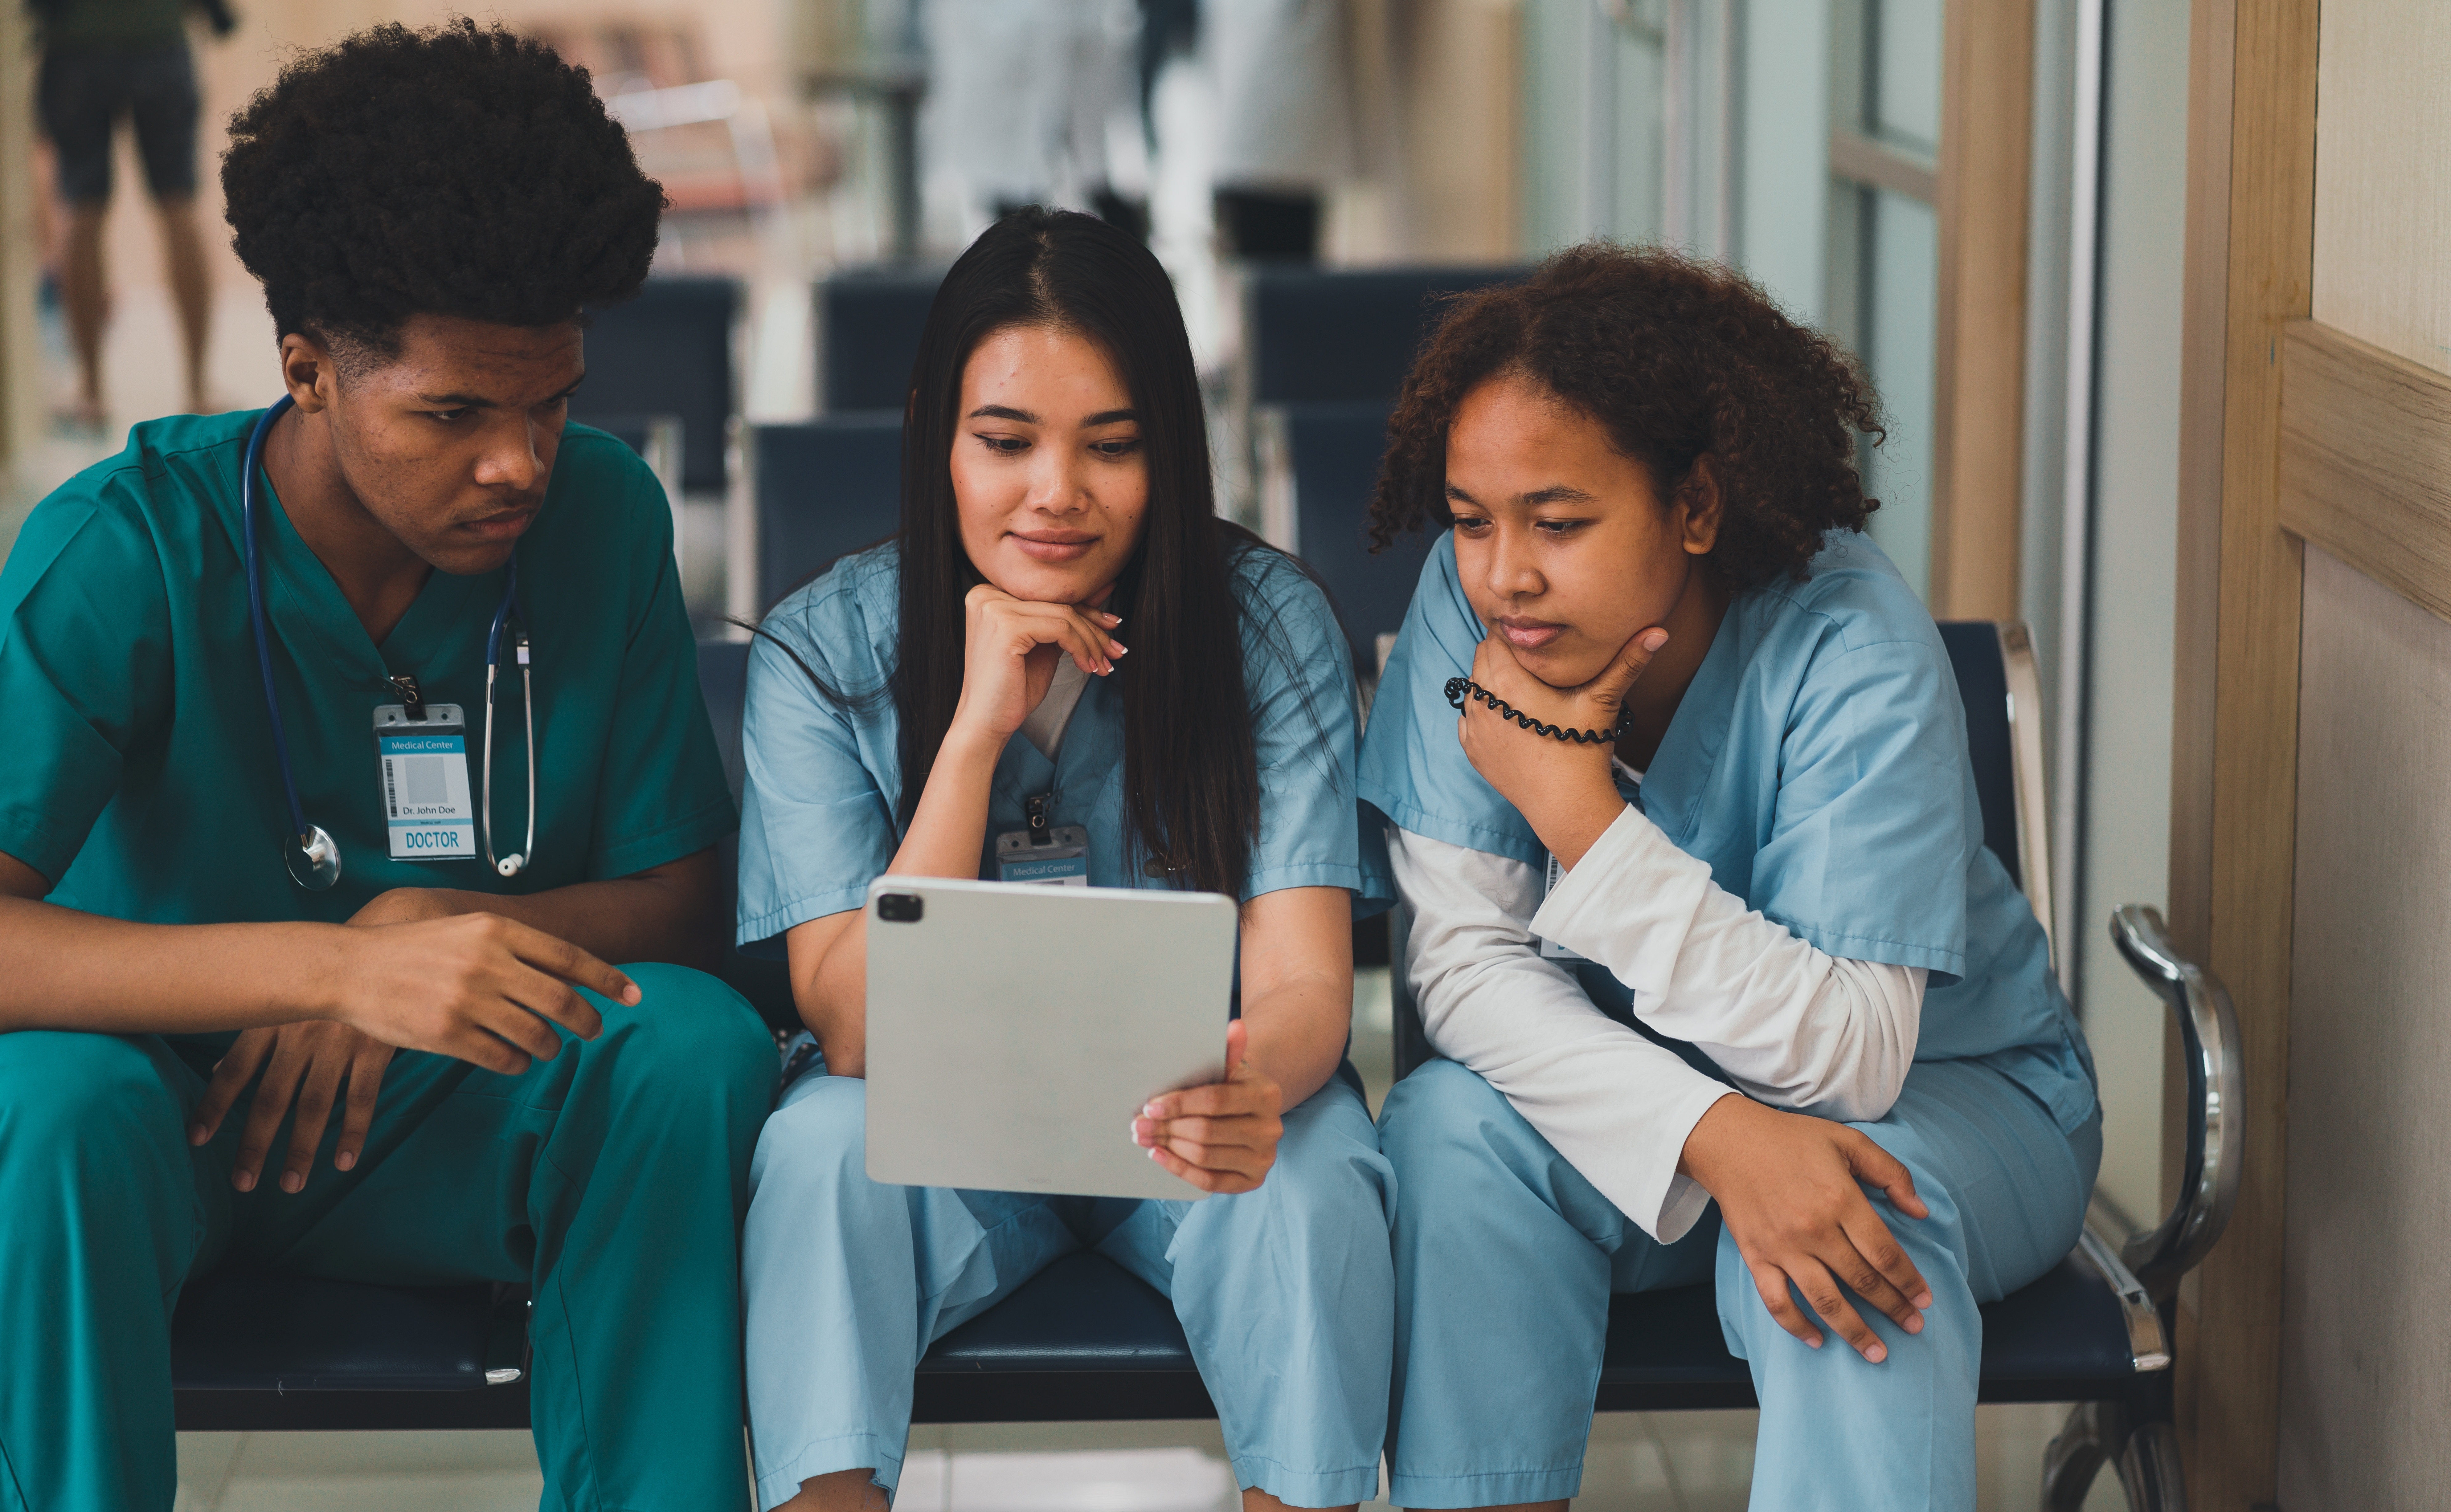 3 nurses in uniform sit closely together, looking at a shared screen. They are learning together.